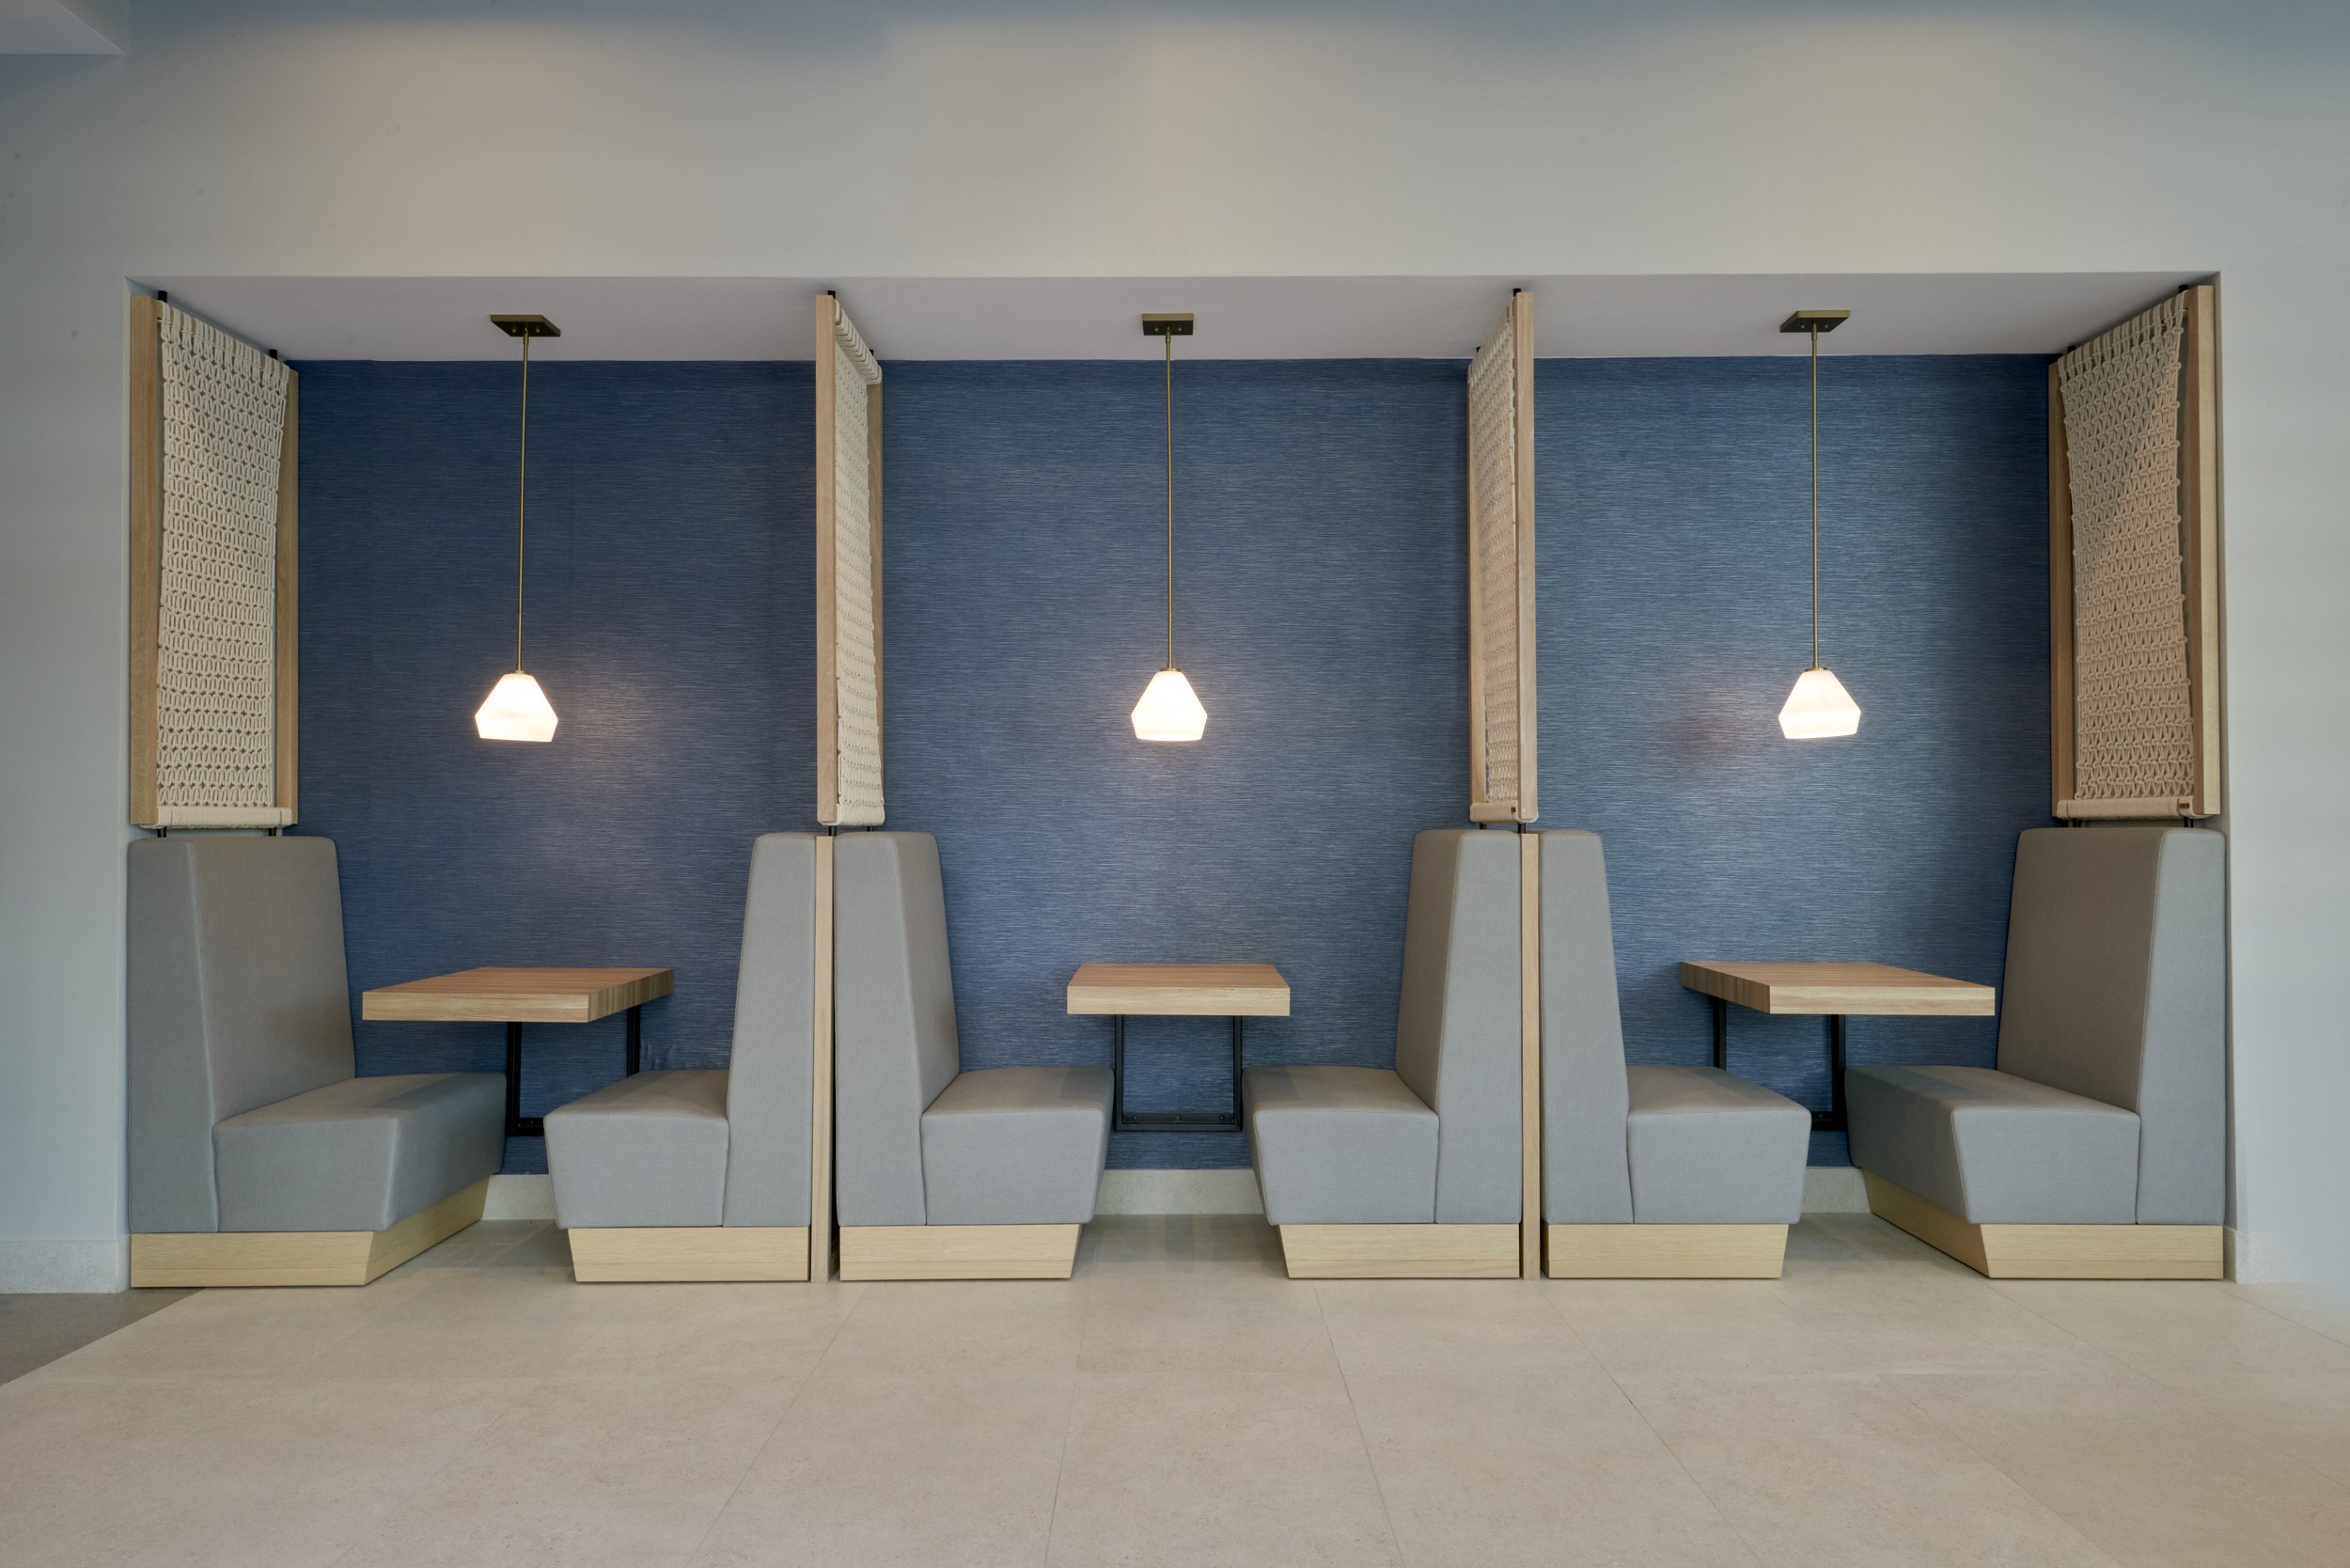  Interior booths of the Residence Inn by Marriott hospitality project. 